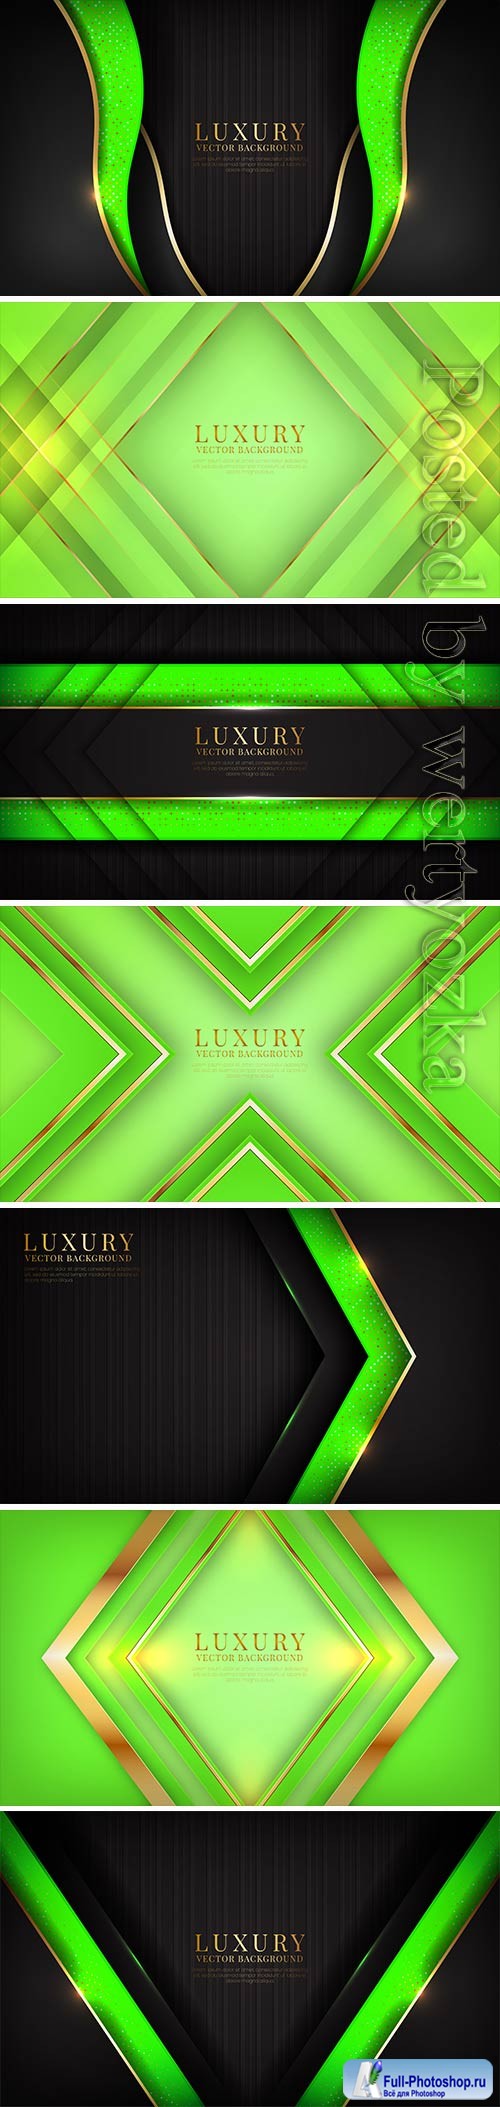 Abstract 3d green luxury background overlap layer with golden metallic lines effect